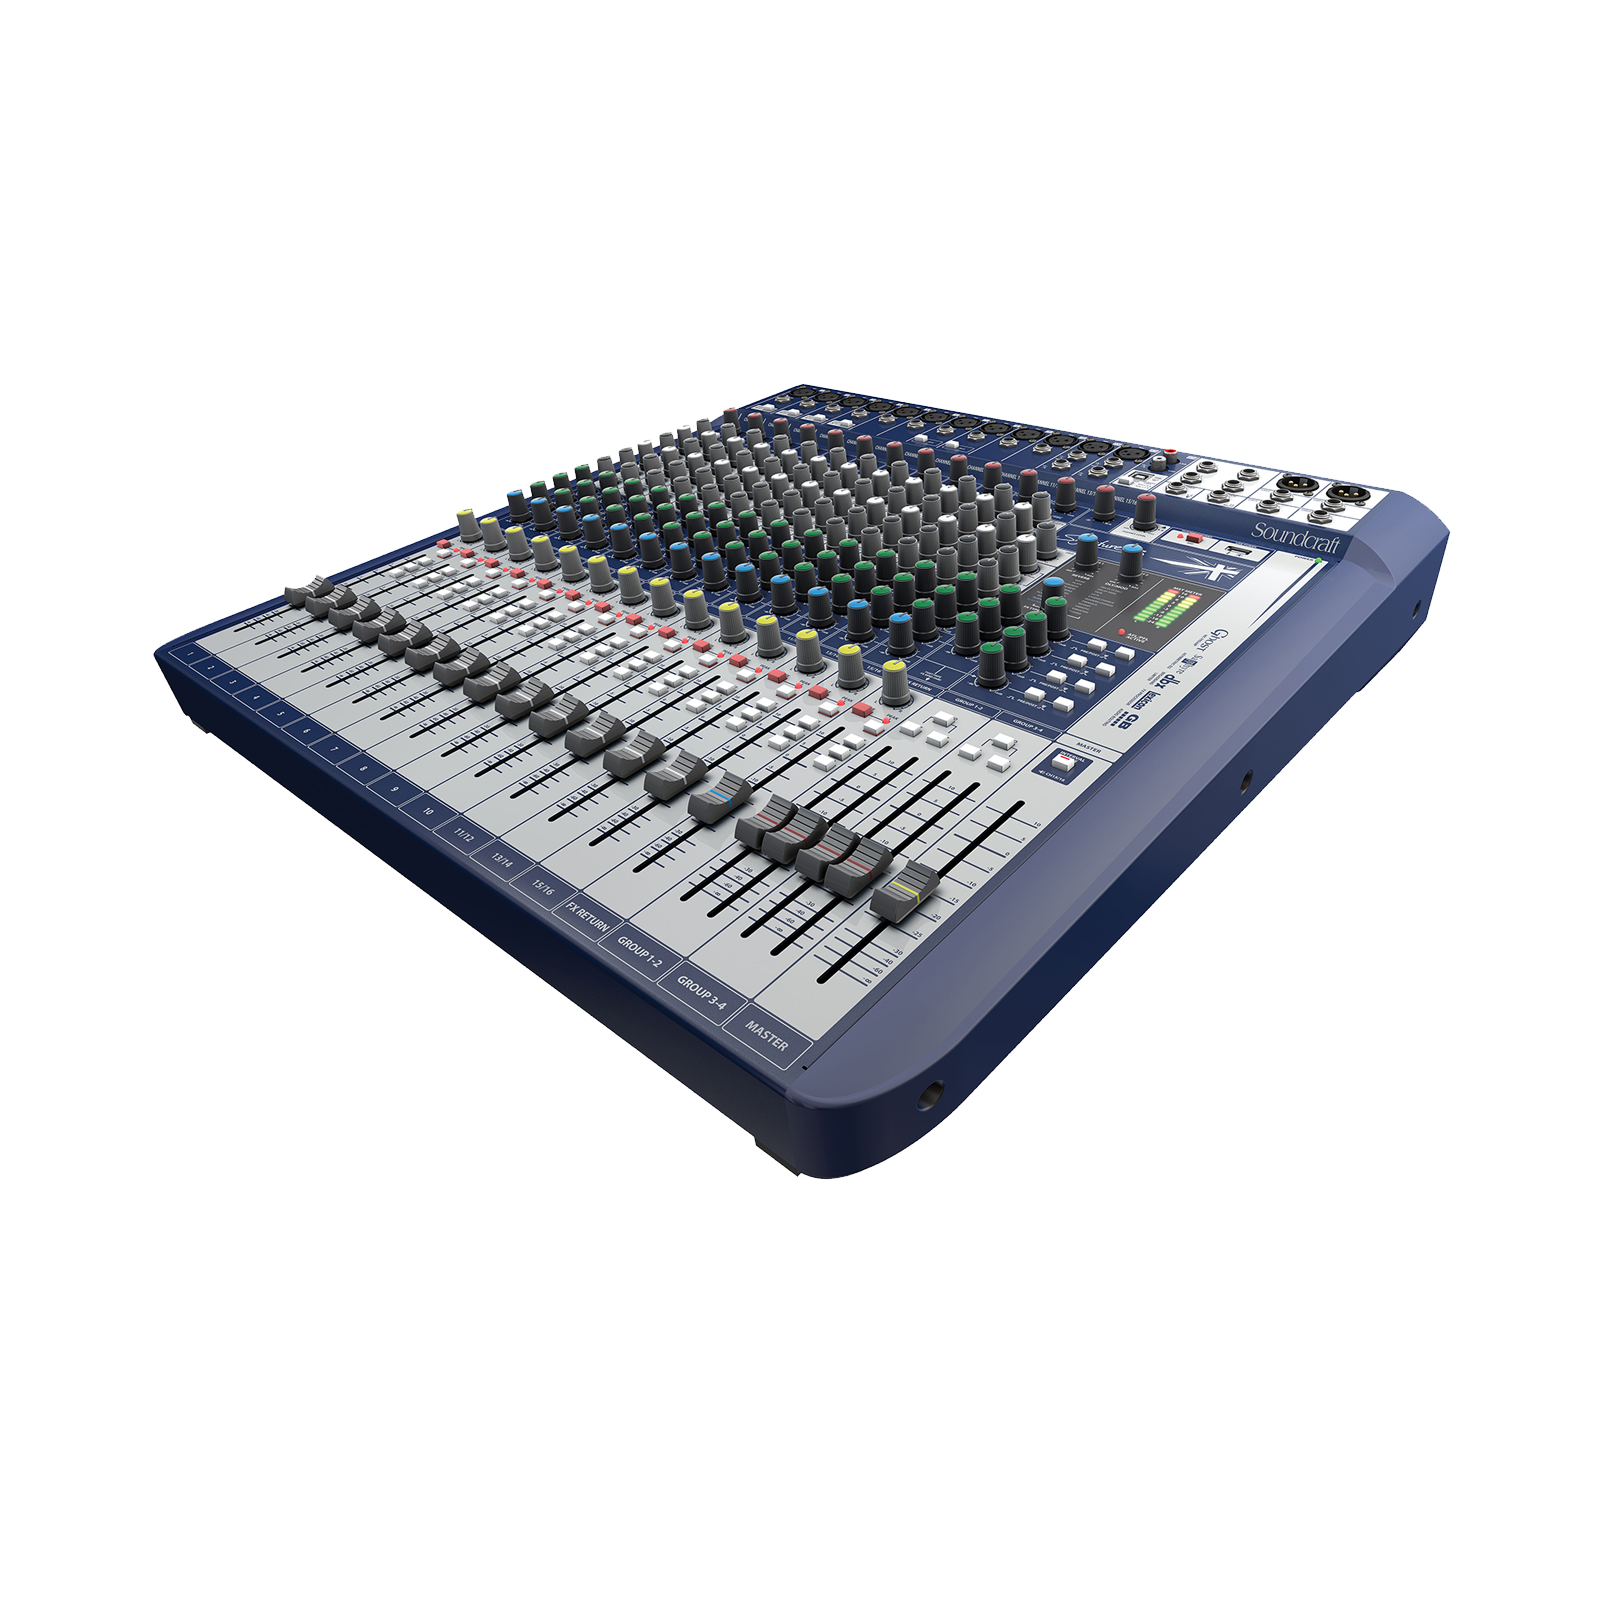 Signature 16 - Dark Blue - 16-input small format analogue mixer with onboard effects - Hero